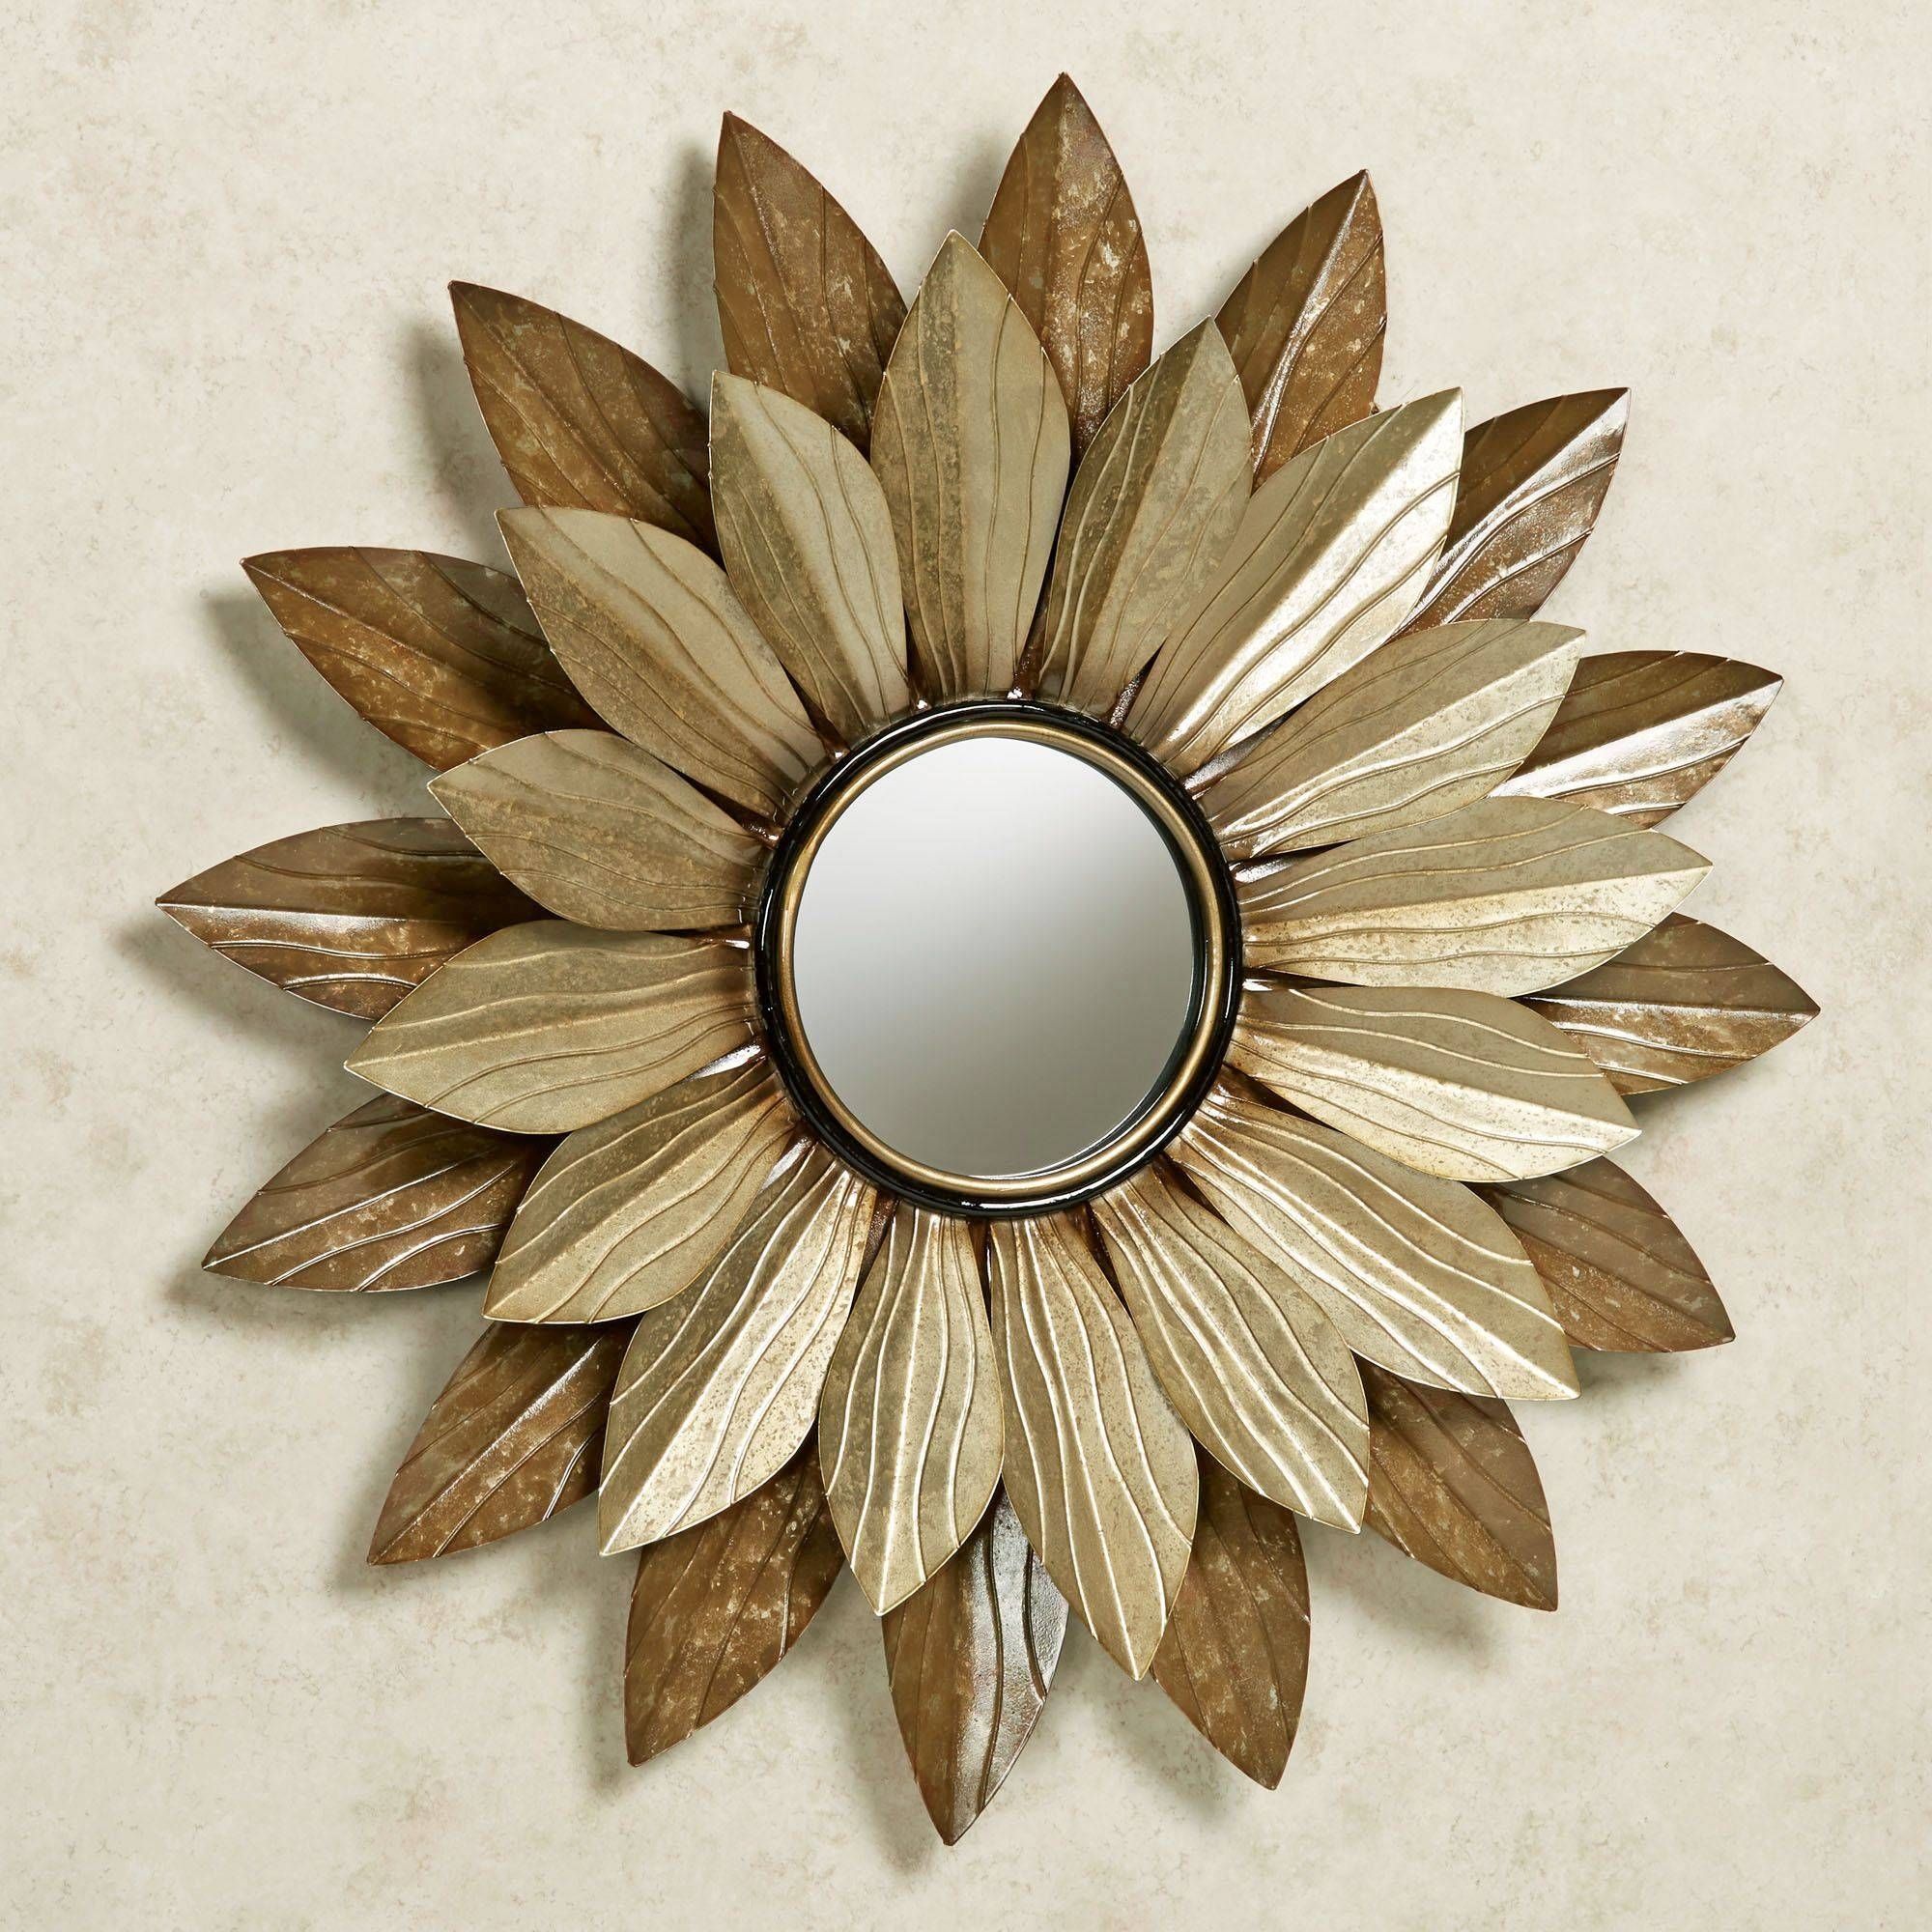 Abellina Layered Floral Mirrored Metal Wall Art Regarding Best And Newest Metallic Wall Art (Gallery 20 of 25)